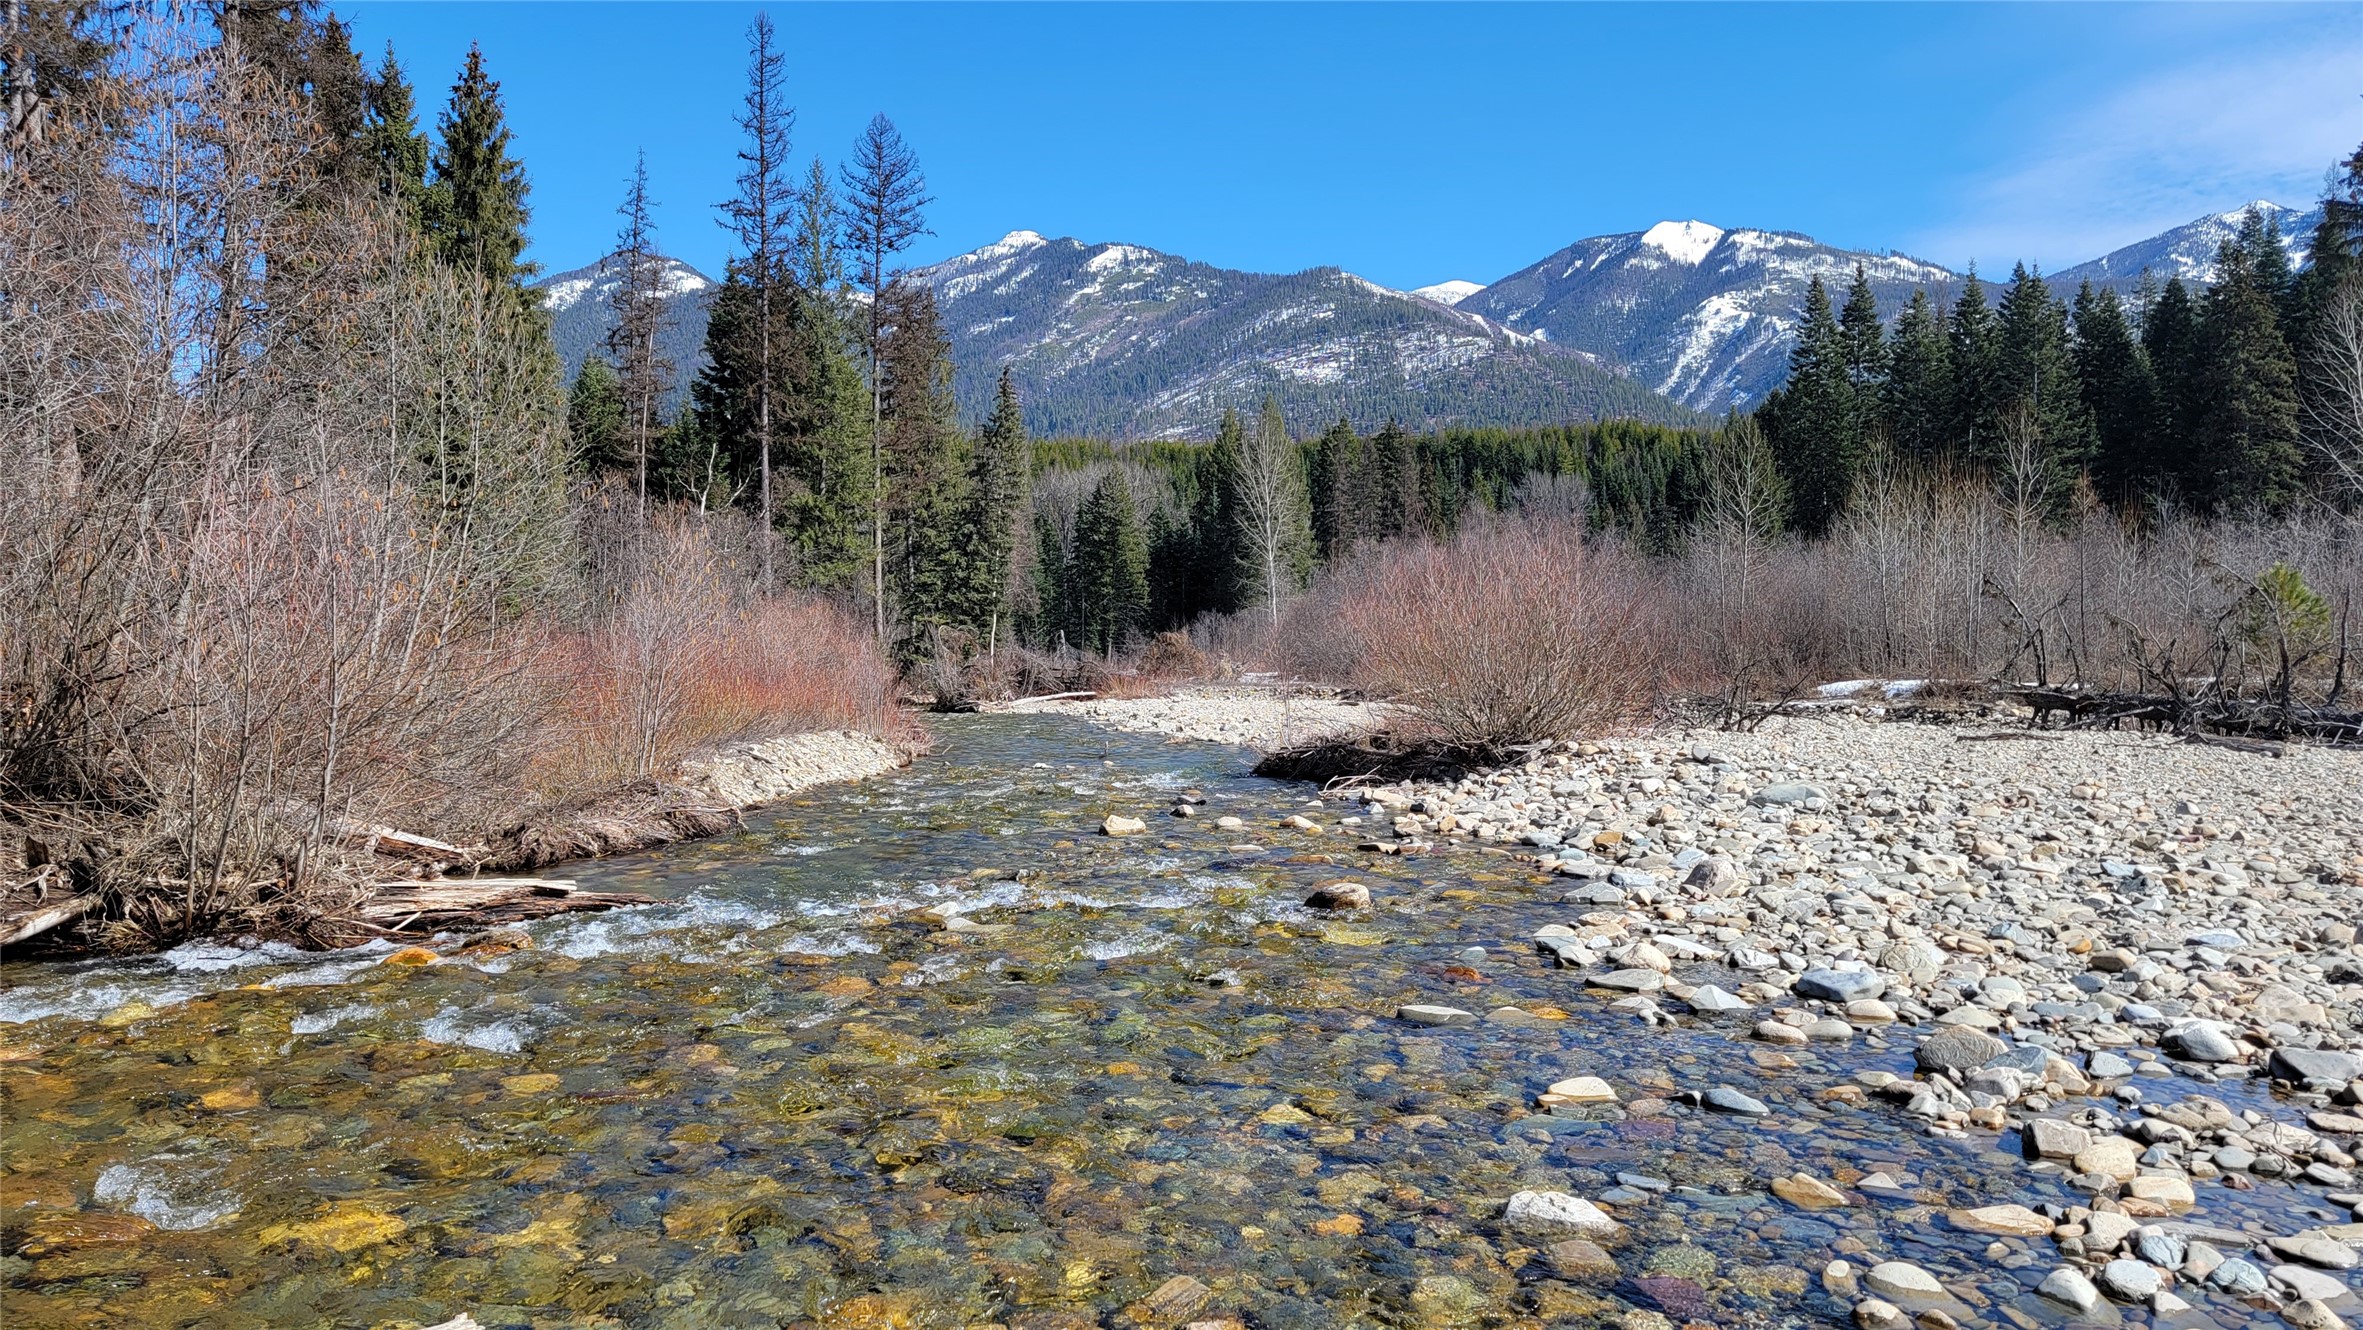 9 level acres on Keeler Creek located between Troy and Bull Lake, 7 miles from Highway 2. The property is timbered with 825 feet of private and useable creek frontage. Ready to build land with utilities and septic approval. Located only minutes away from local area attractions such as Bull Lake, Ross Creek Cedars, and Kootenai Falls. Seller can install electrical service and septic system for additional cost. Listing agent is related to as well as an employee of the seller. Call Crawford Dinning at 406-291-5577 or your real estate professional.